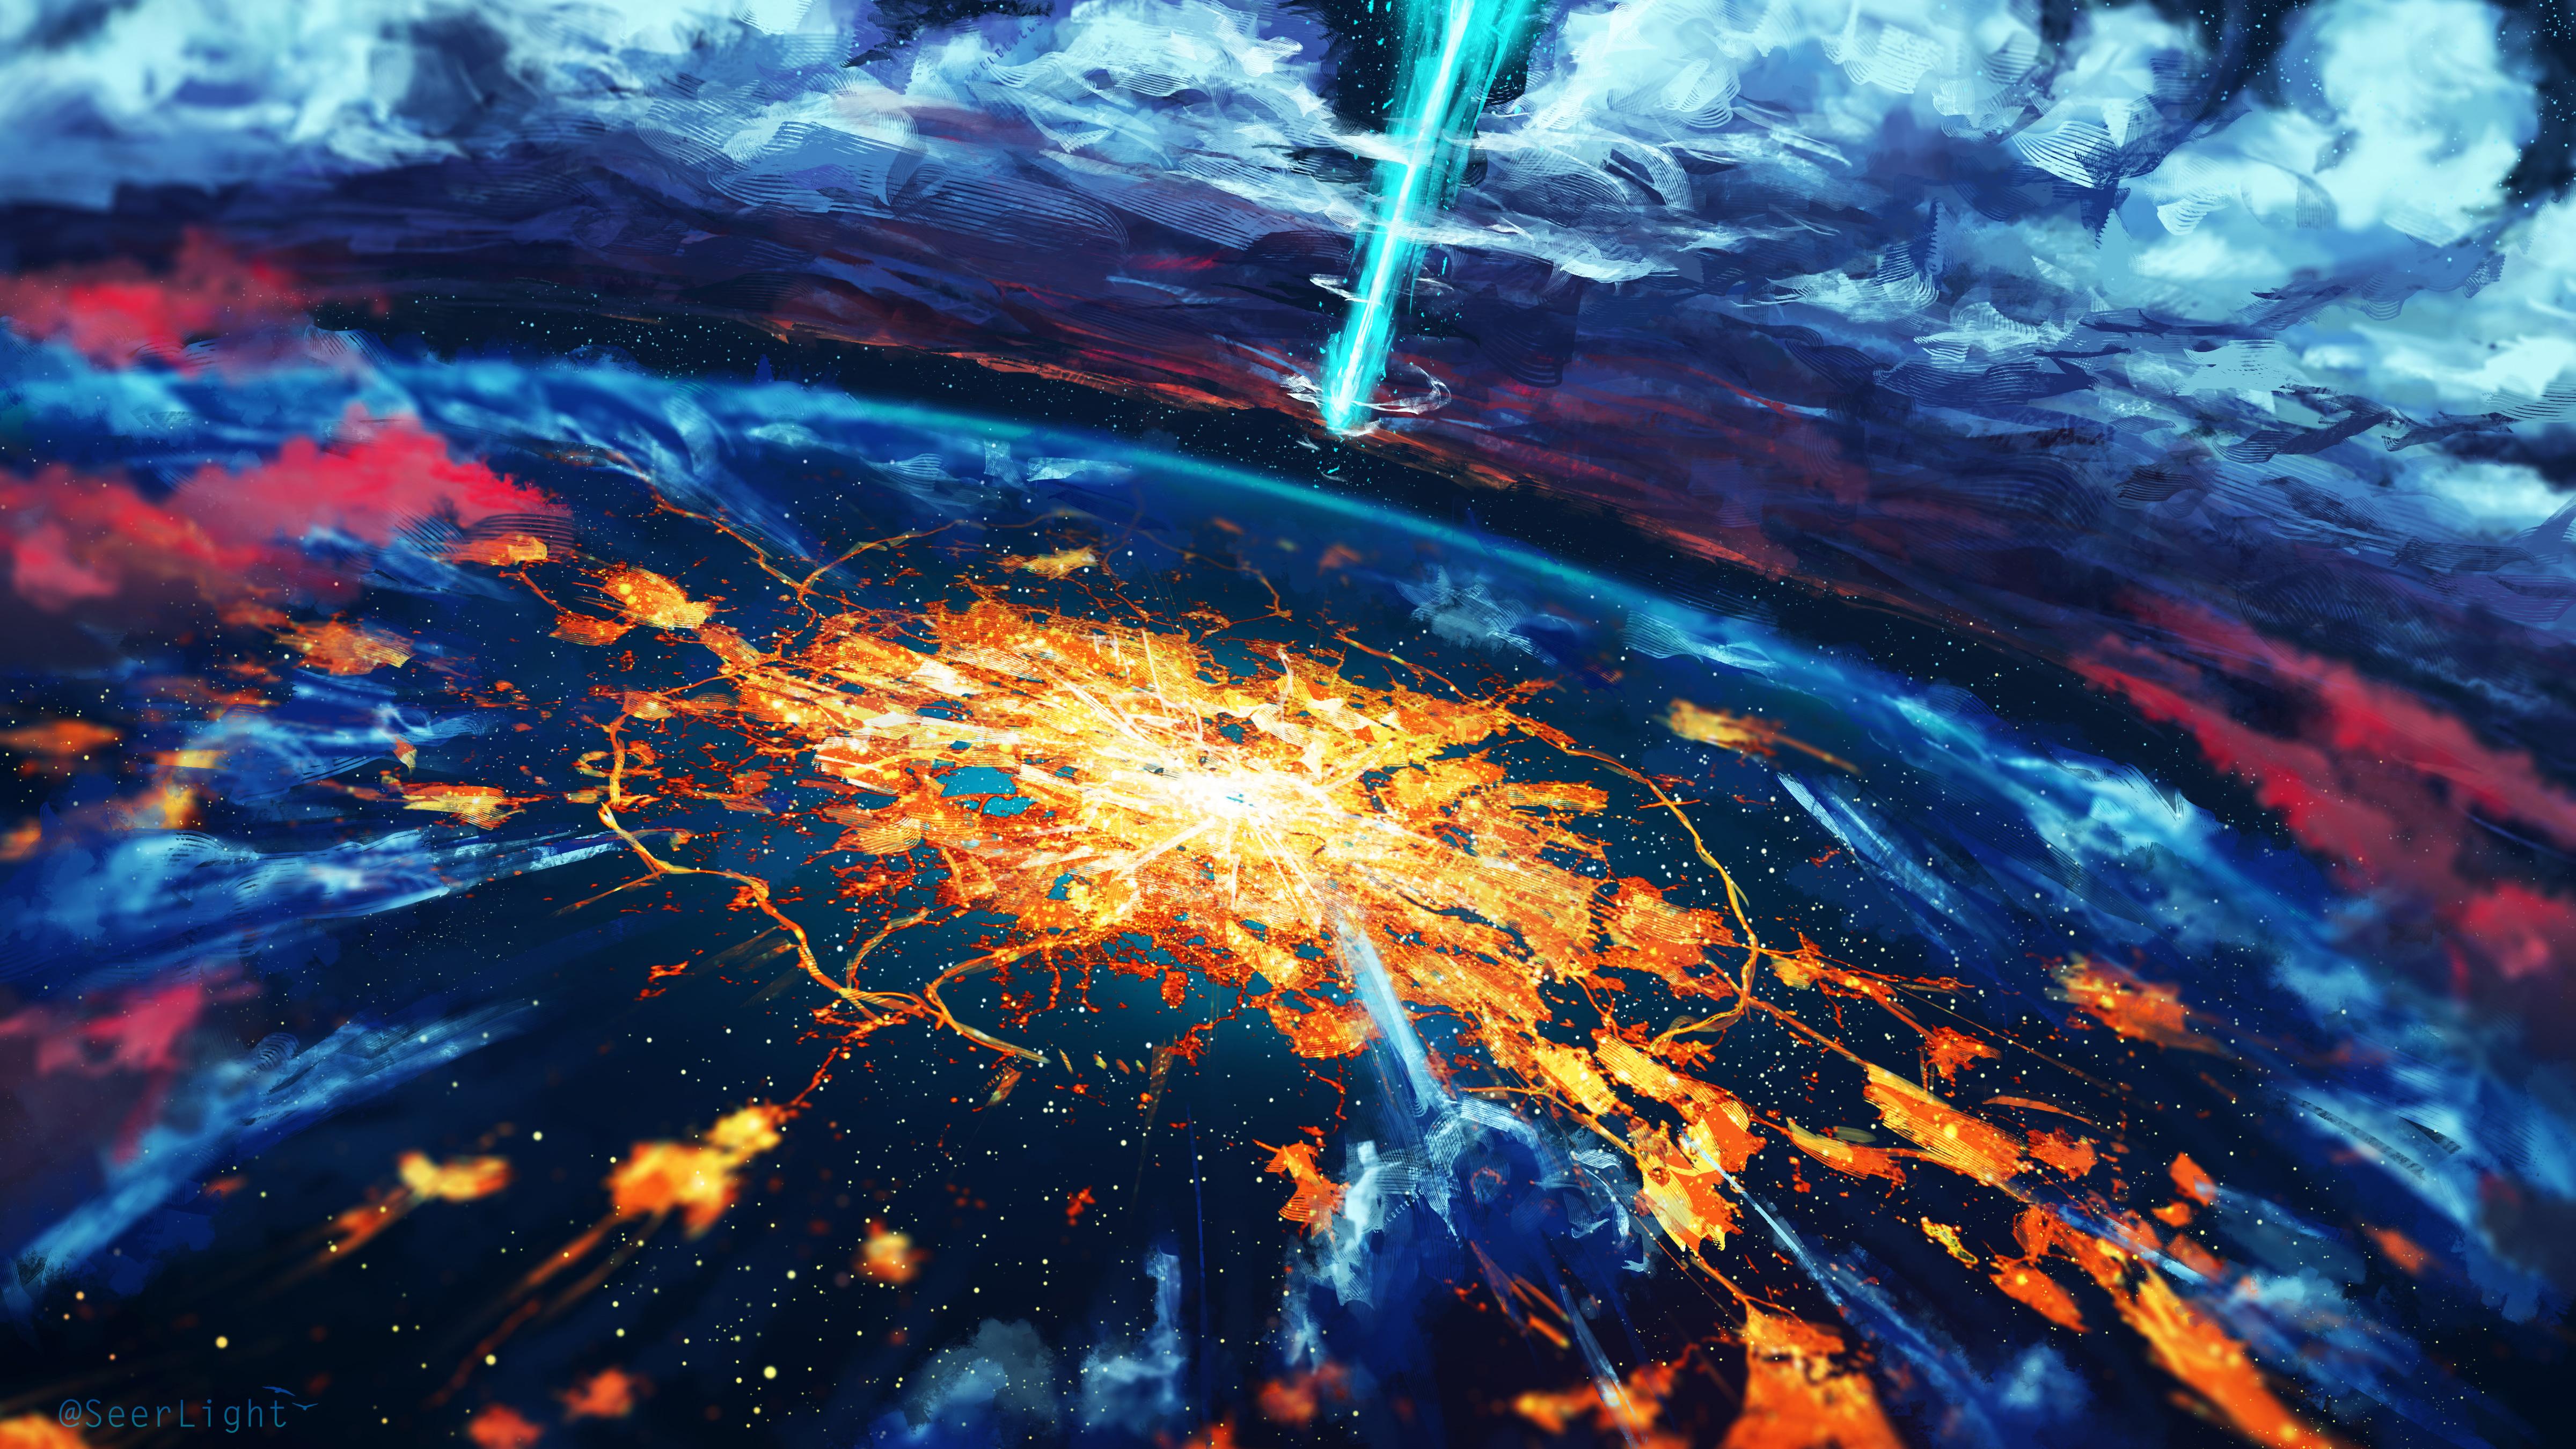 Apocalypse Cosmos Disaster Explosion World, HD Artist, 4k Wallpapers